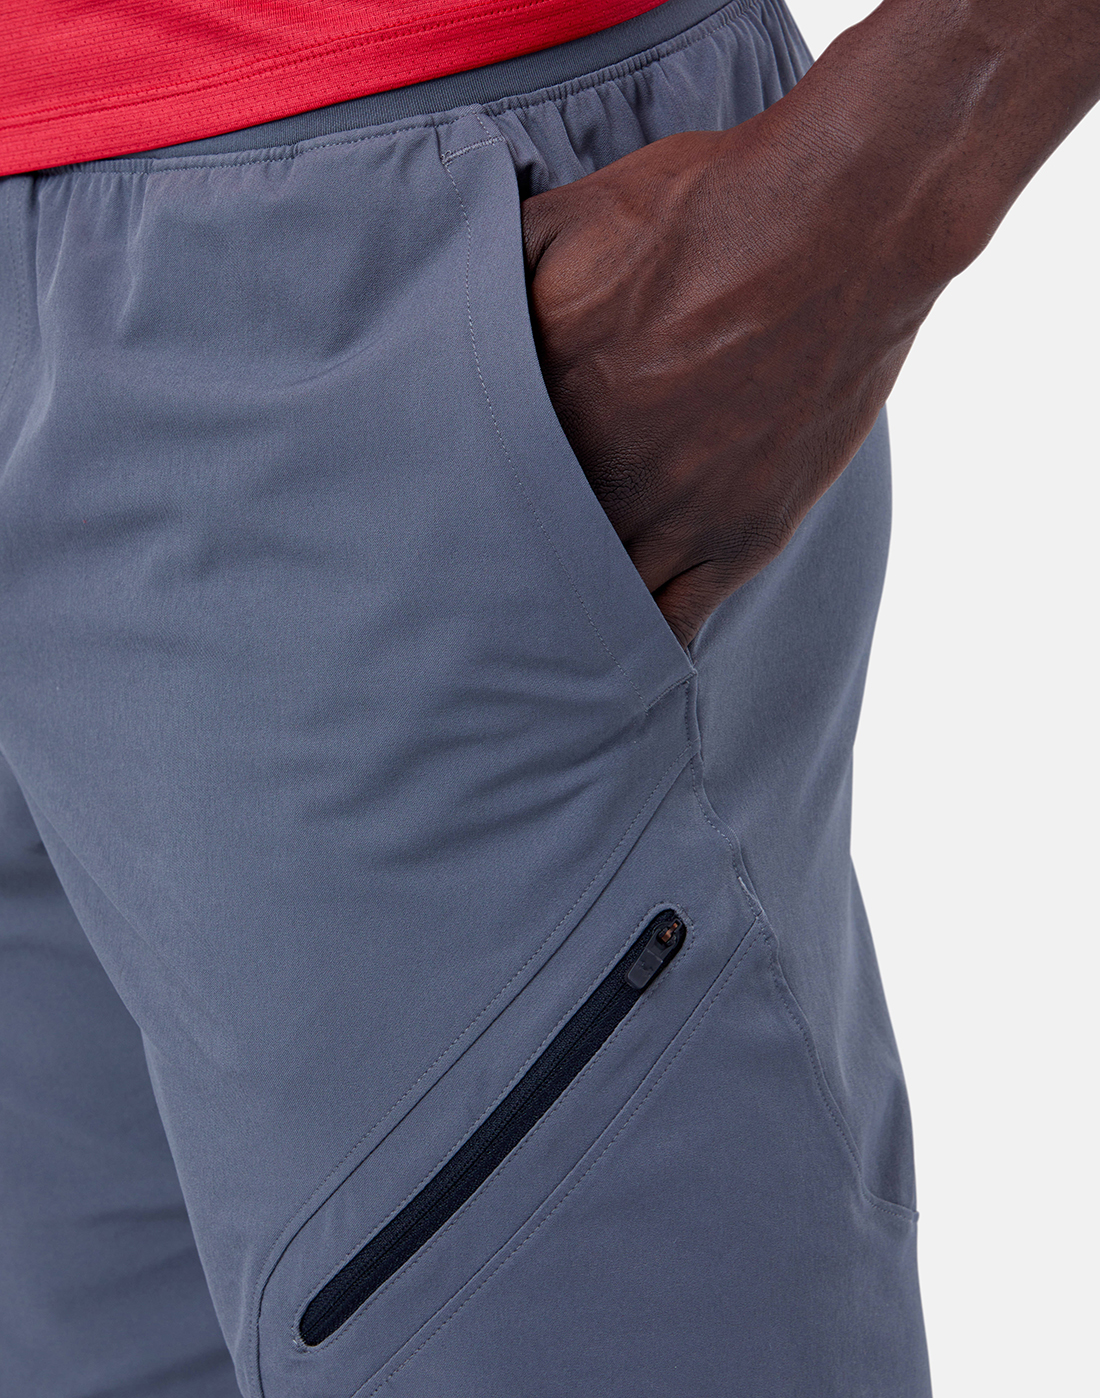 Under Armour Mens Unstoppable Cargo Shorts - Grey | Life Style Sports IE